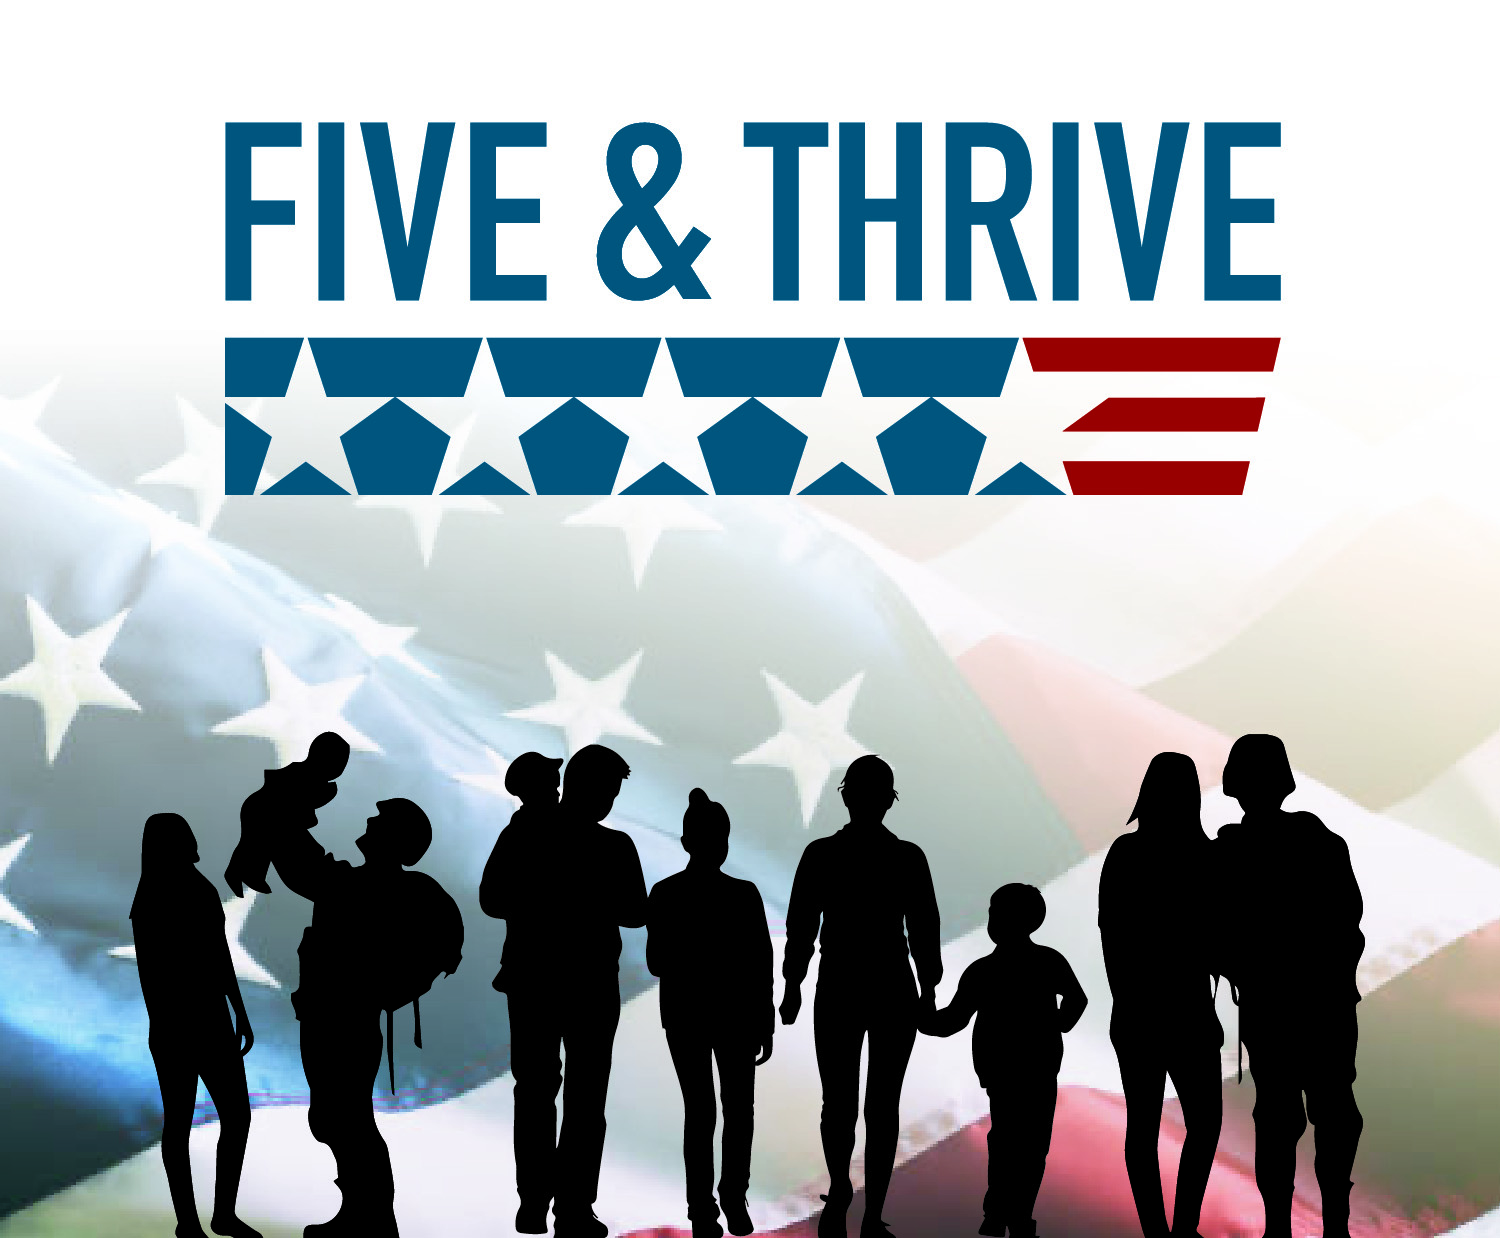 Five & Thrive graphic